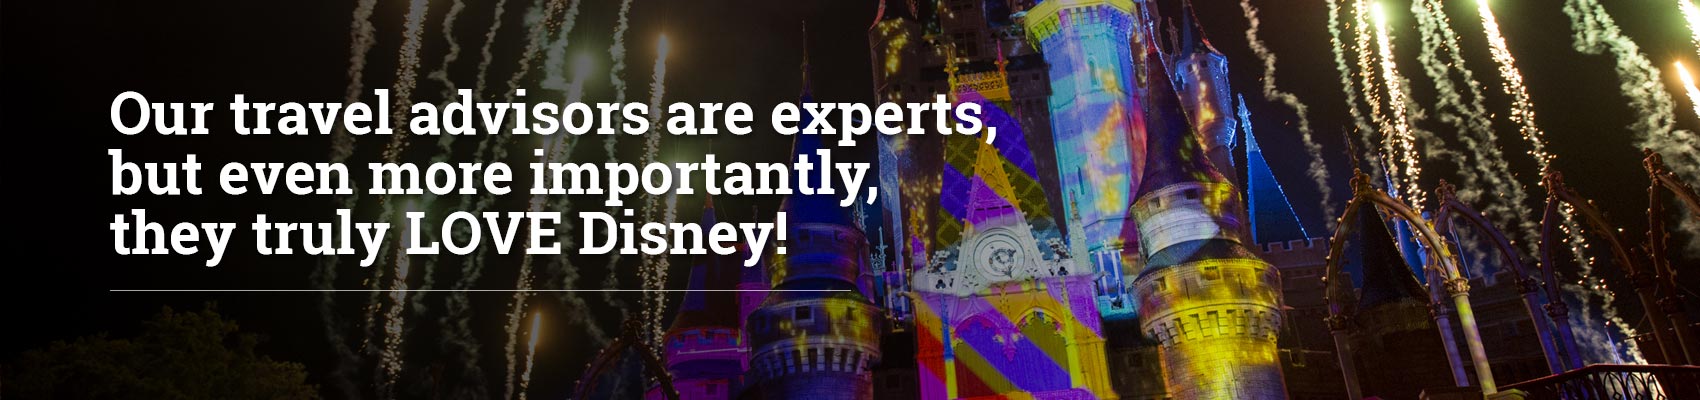 Our advisors are experts, but even more importantly they truly LOVE Disney! 